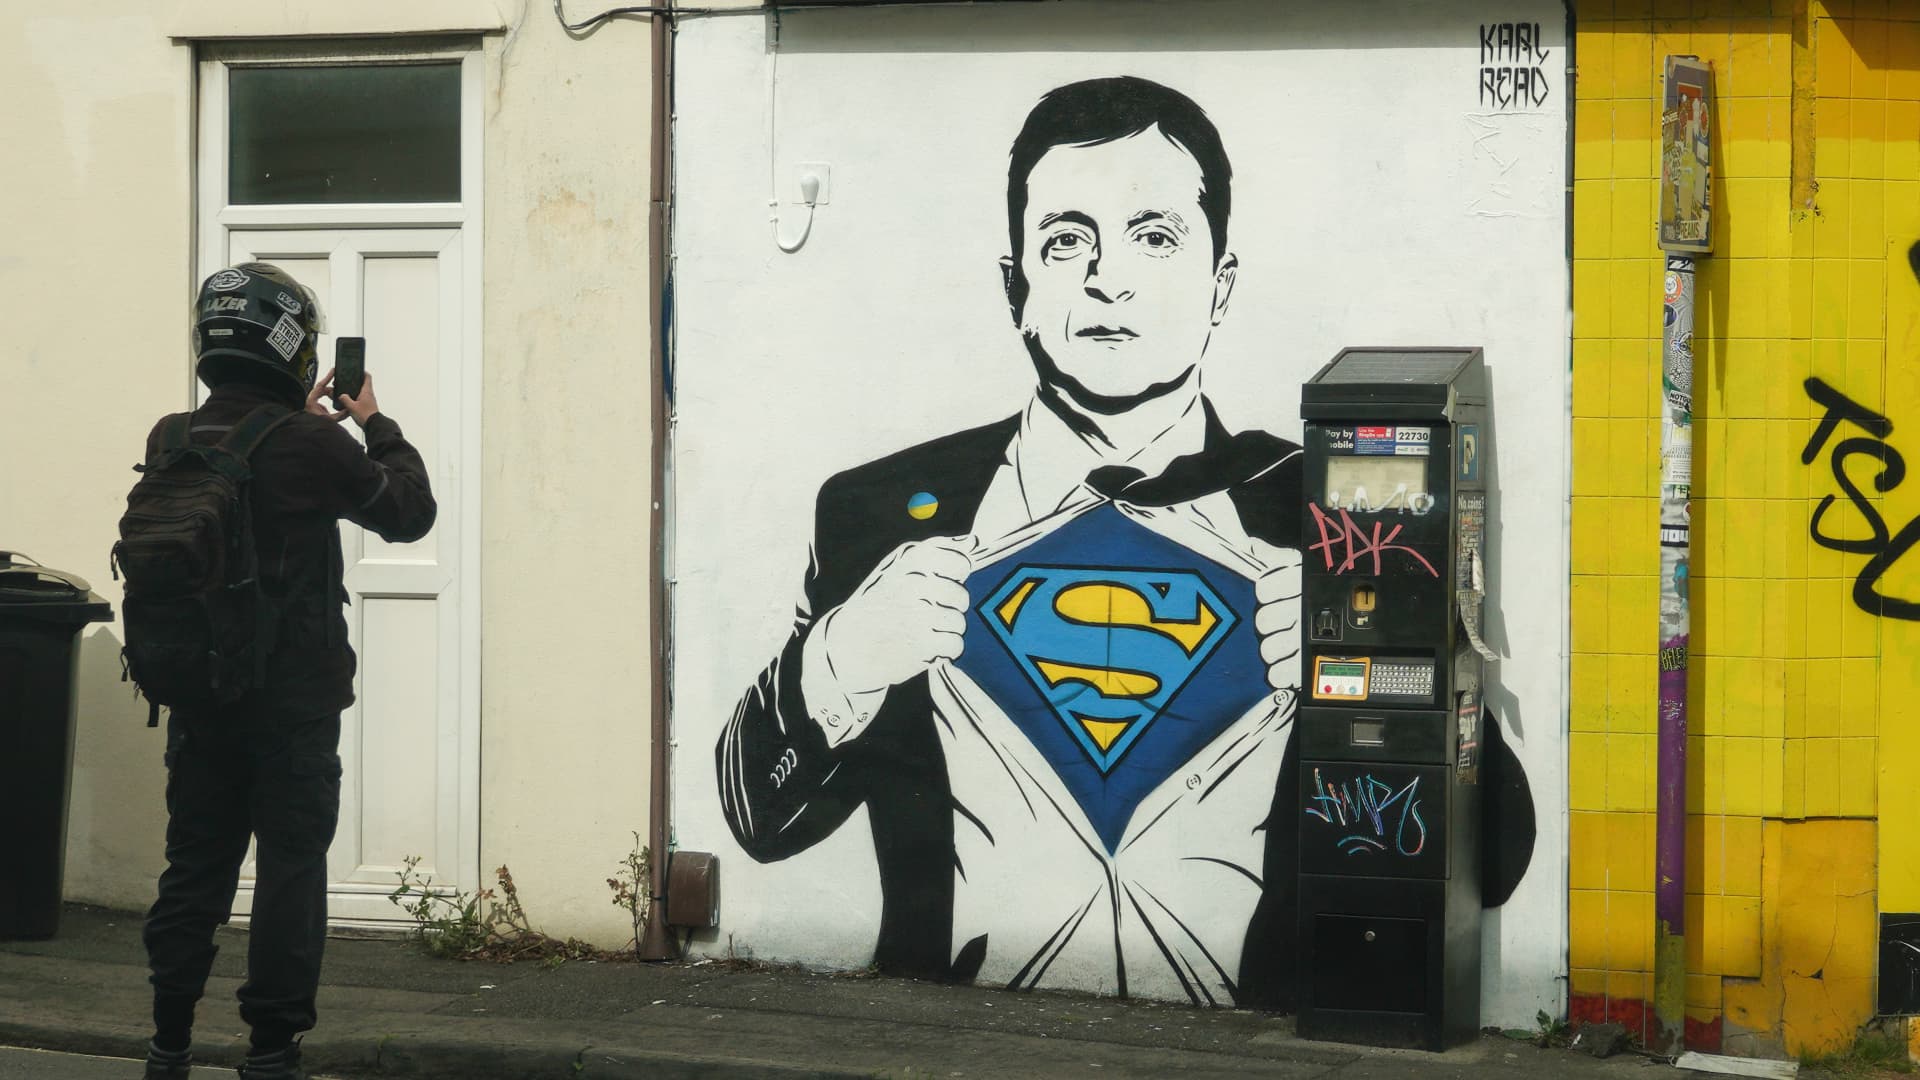 Artwork of Ukrainian president Volodymyr Zelenskyy being portrayed as Superman is seen on a wall of a shop, on May 15, 2022 in Bristol, England.